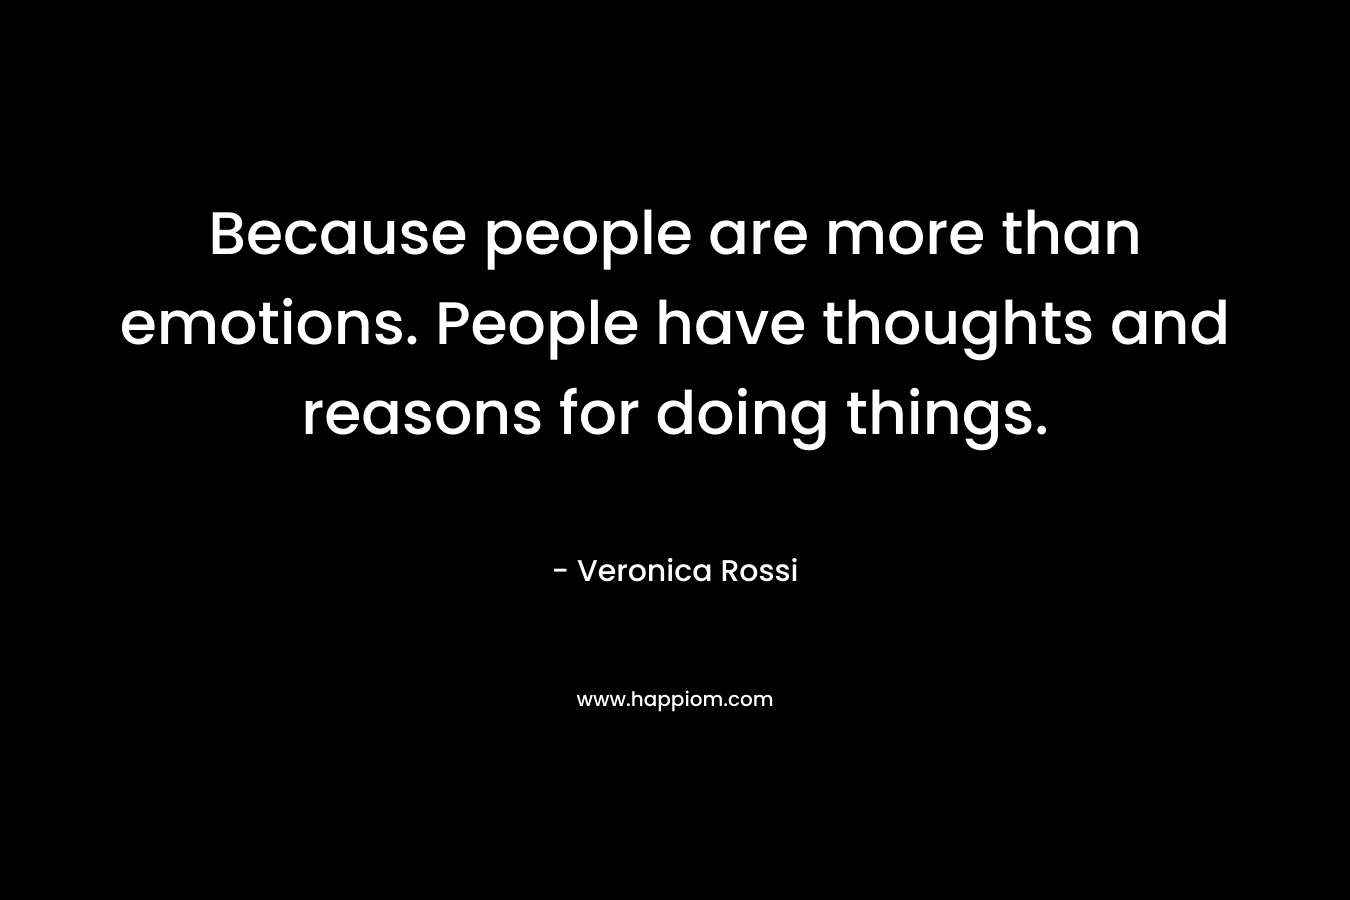 Because people are more than emotions. People have thoughts and reasons for doing things. – Veronica Rossi